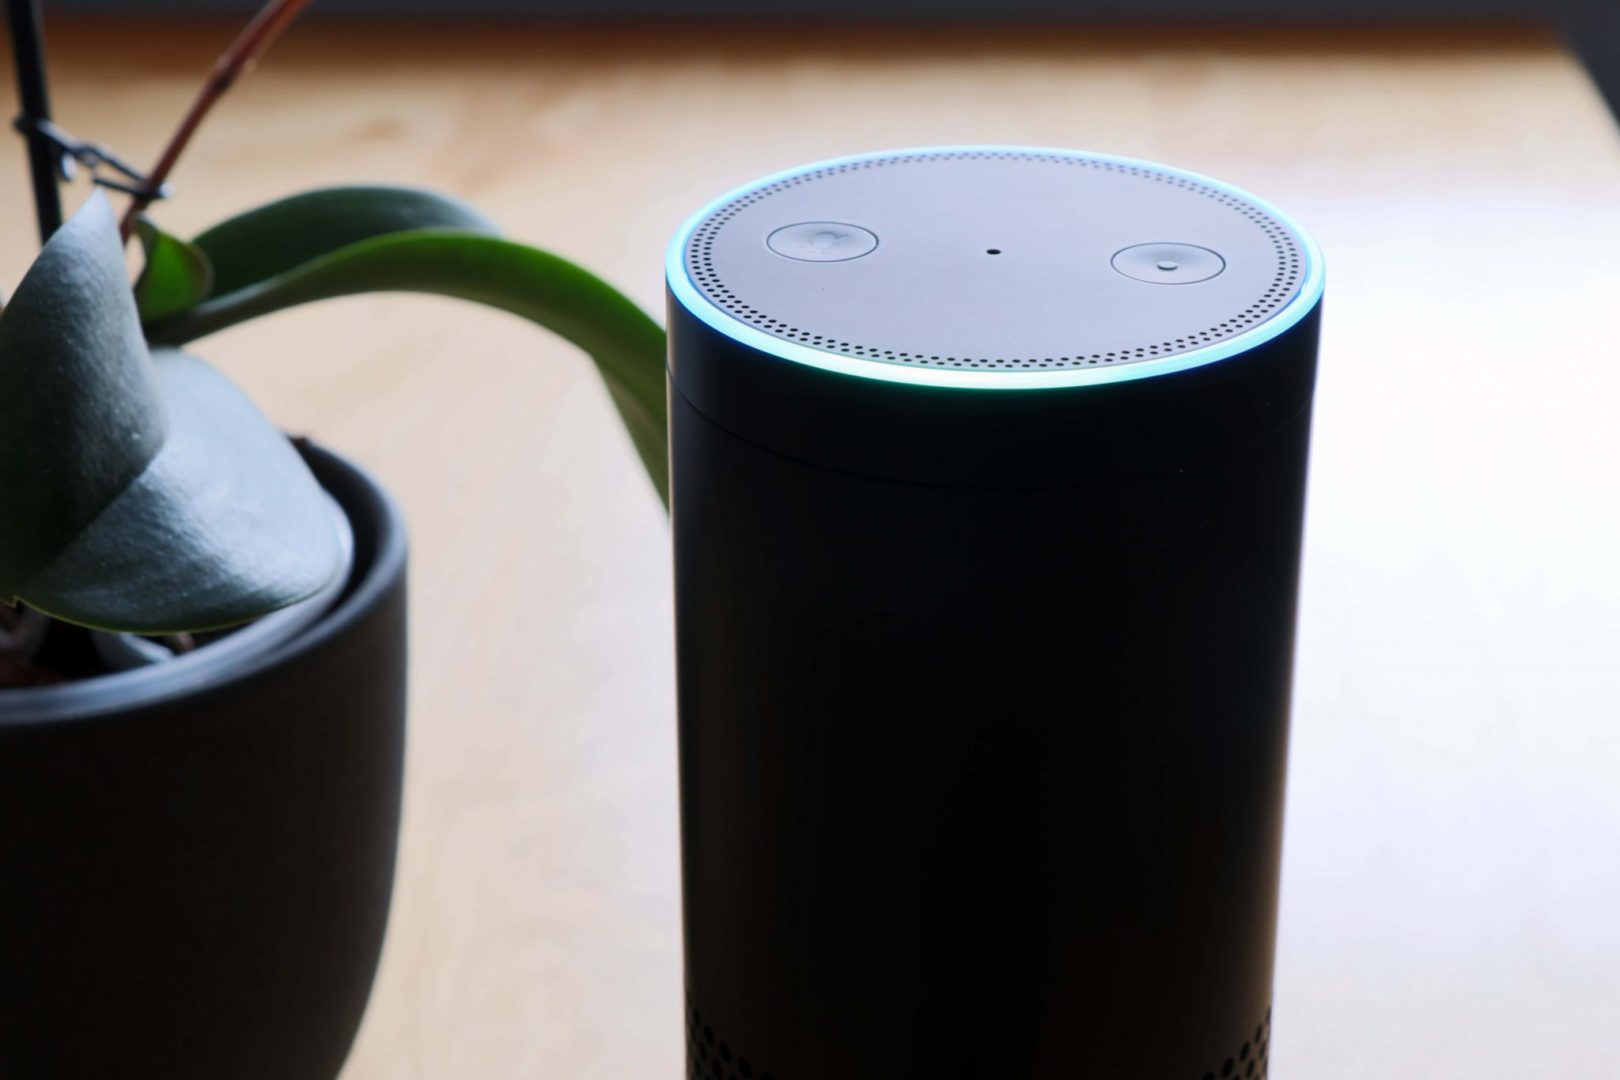 Using devices like the Amazon Echo to teach you how to carry out tasks in one of the new digital marketing trends of 2018.